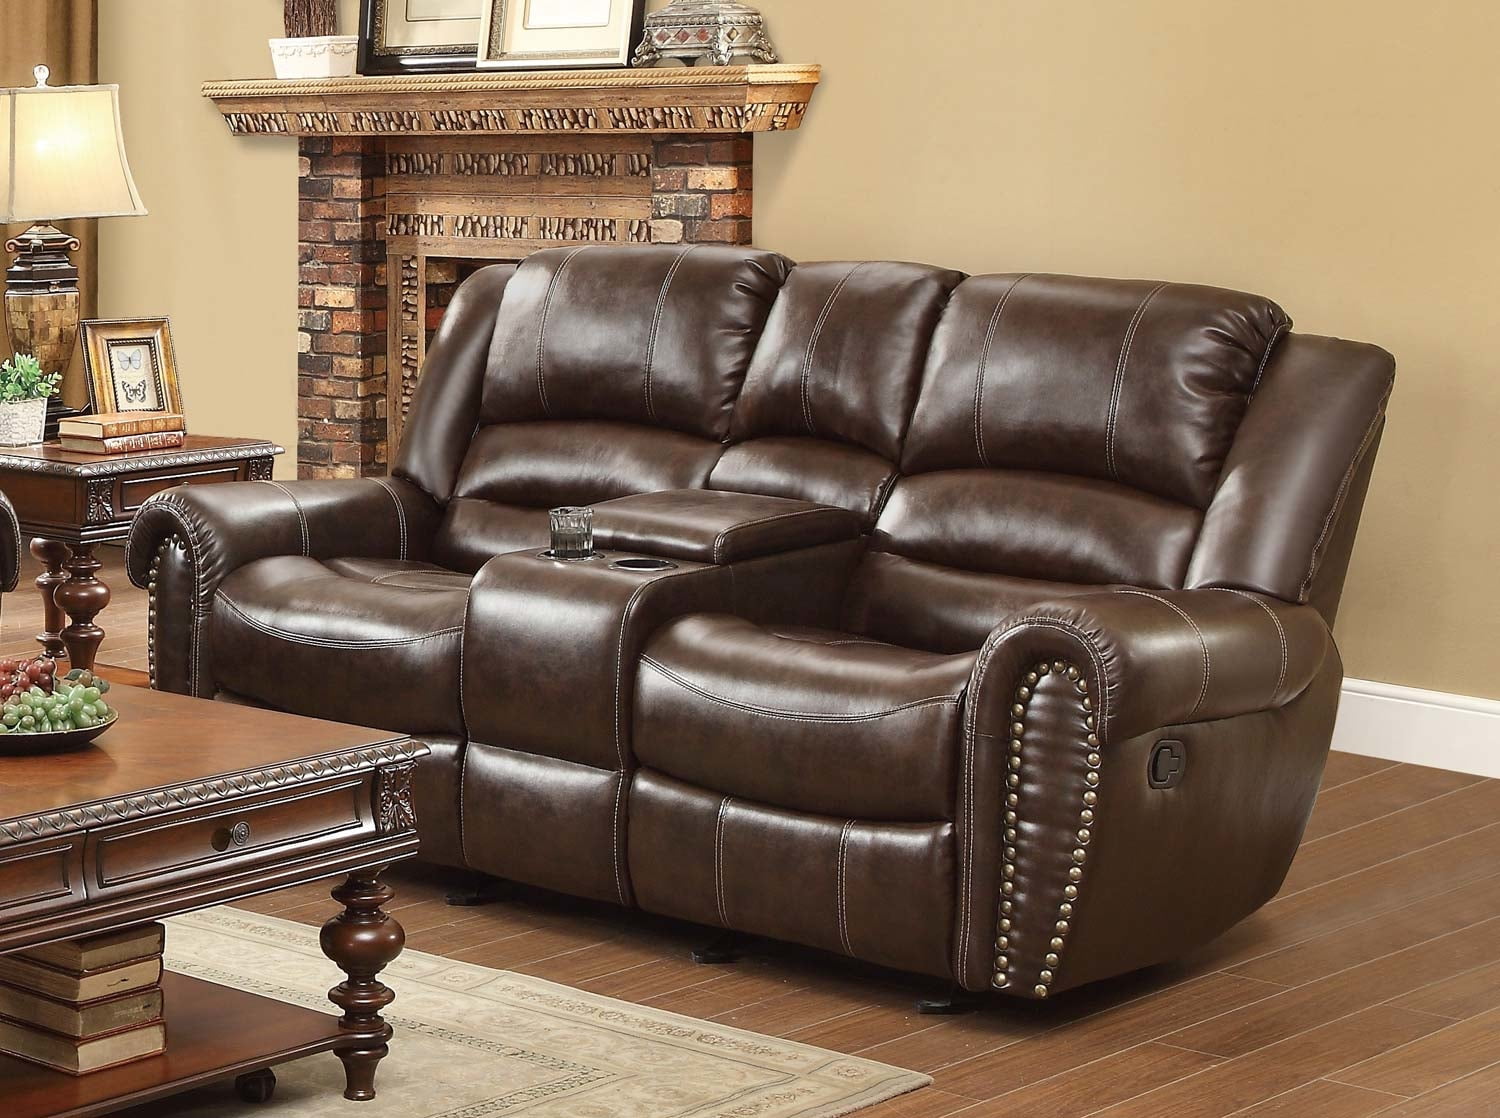 rcwilley leather recliner sofa and love seat